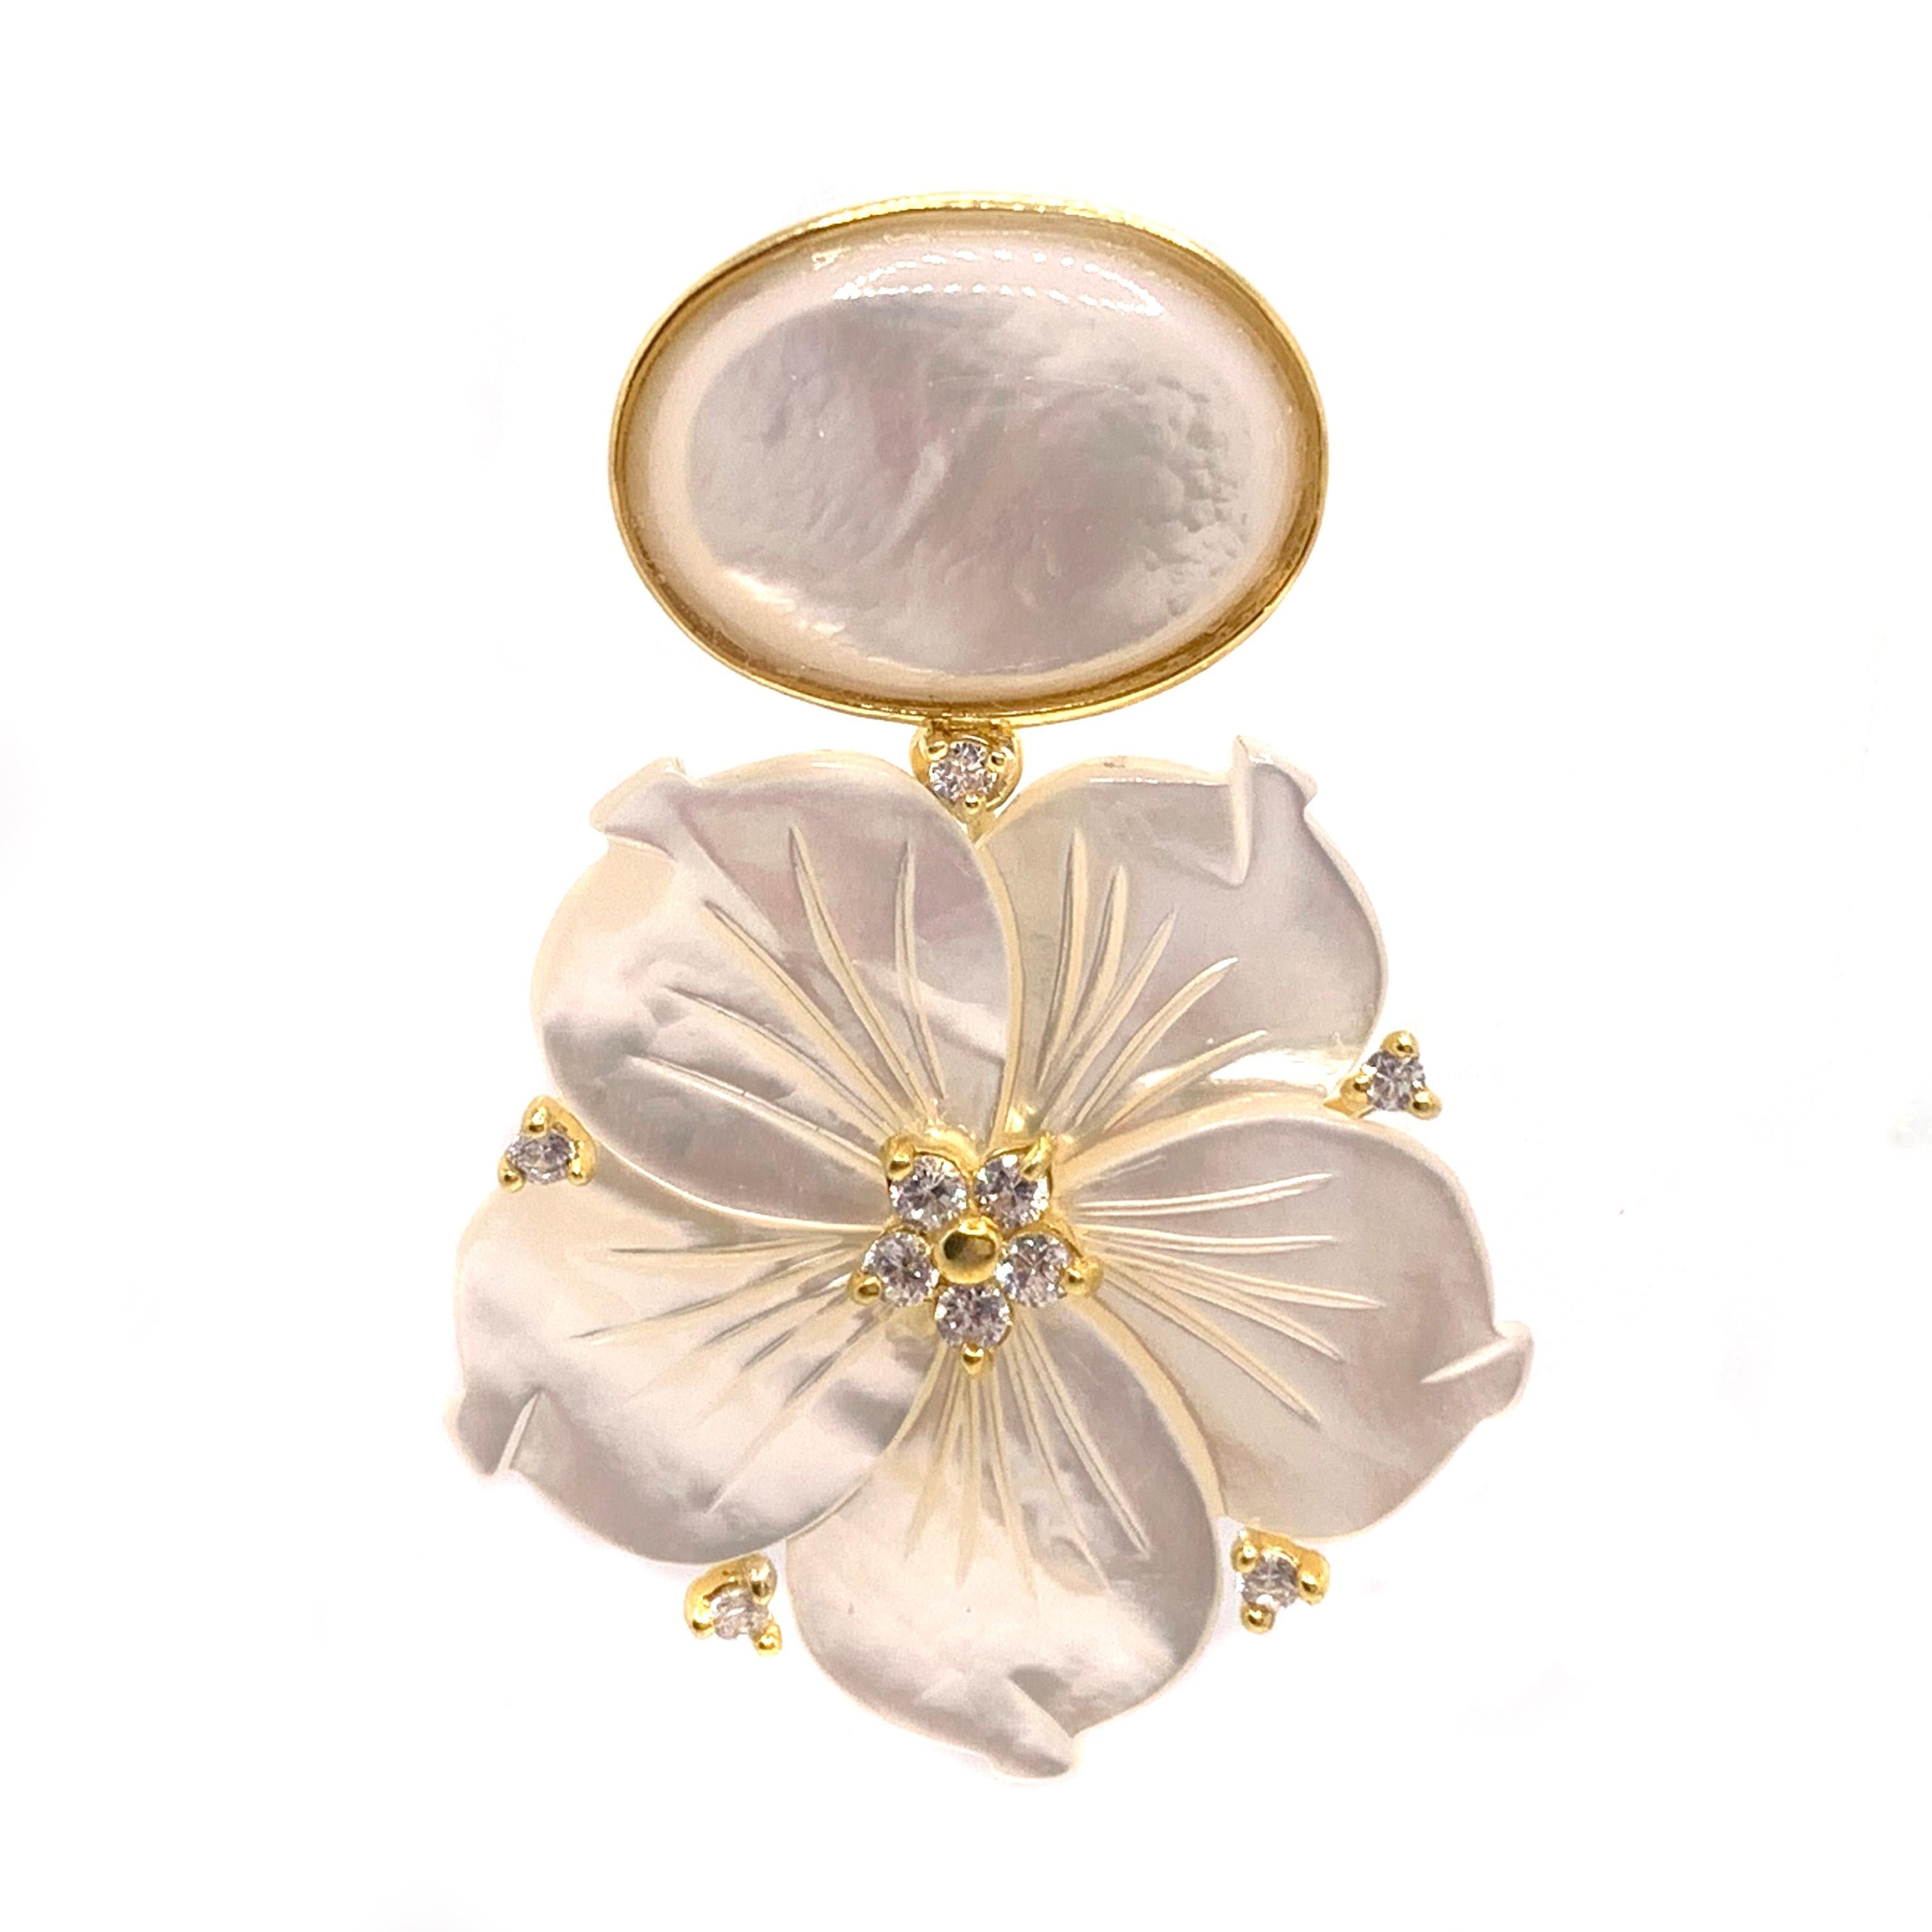 Stunning Oval Cabochon and Carved Flower Mother of Pearl Drop Vermeil Earrings

This gorgeous pair of earrings features oval cabochon-cut mother of pearl and beautifully carved white mother of pearl flower, adorned with round simulated diamond,